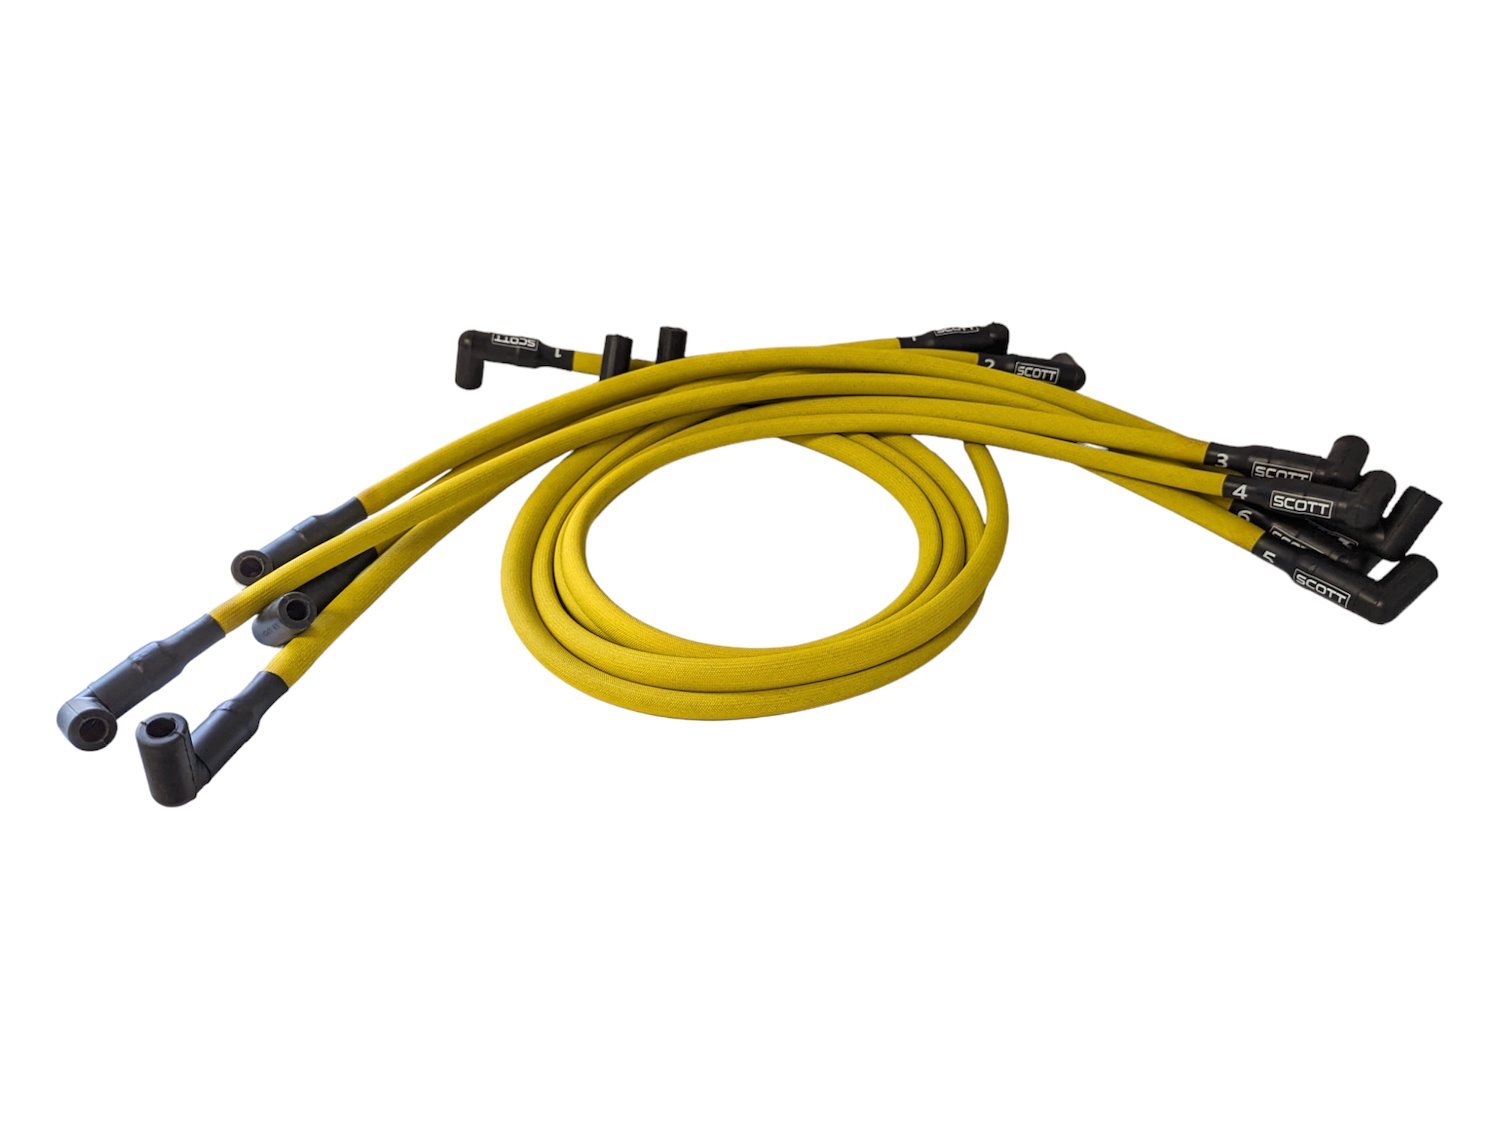 SPW300-PS-416-5 Super Mag Fiberglass-Oversleeved Spark Plug Wire Set for Big Block Chevy, Under Header [Yellow]